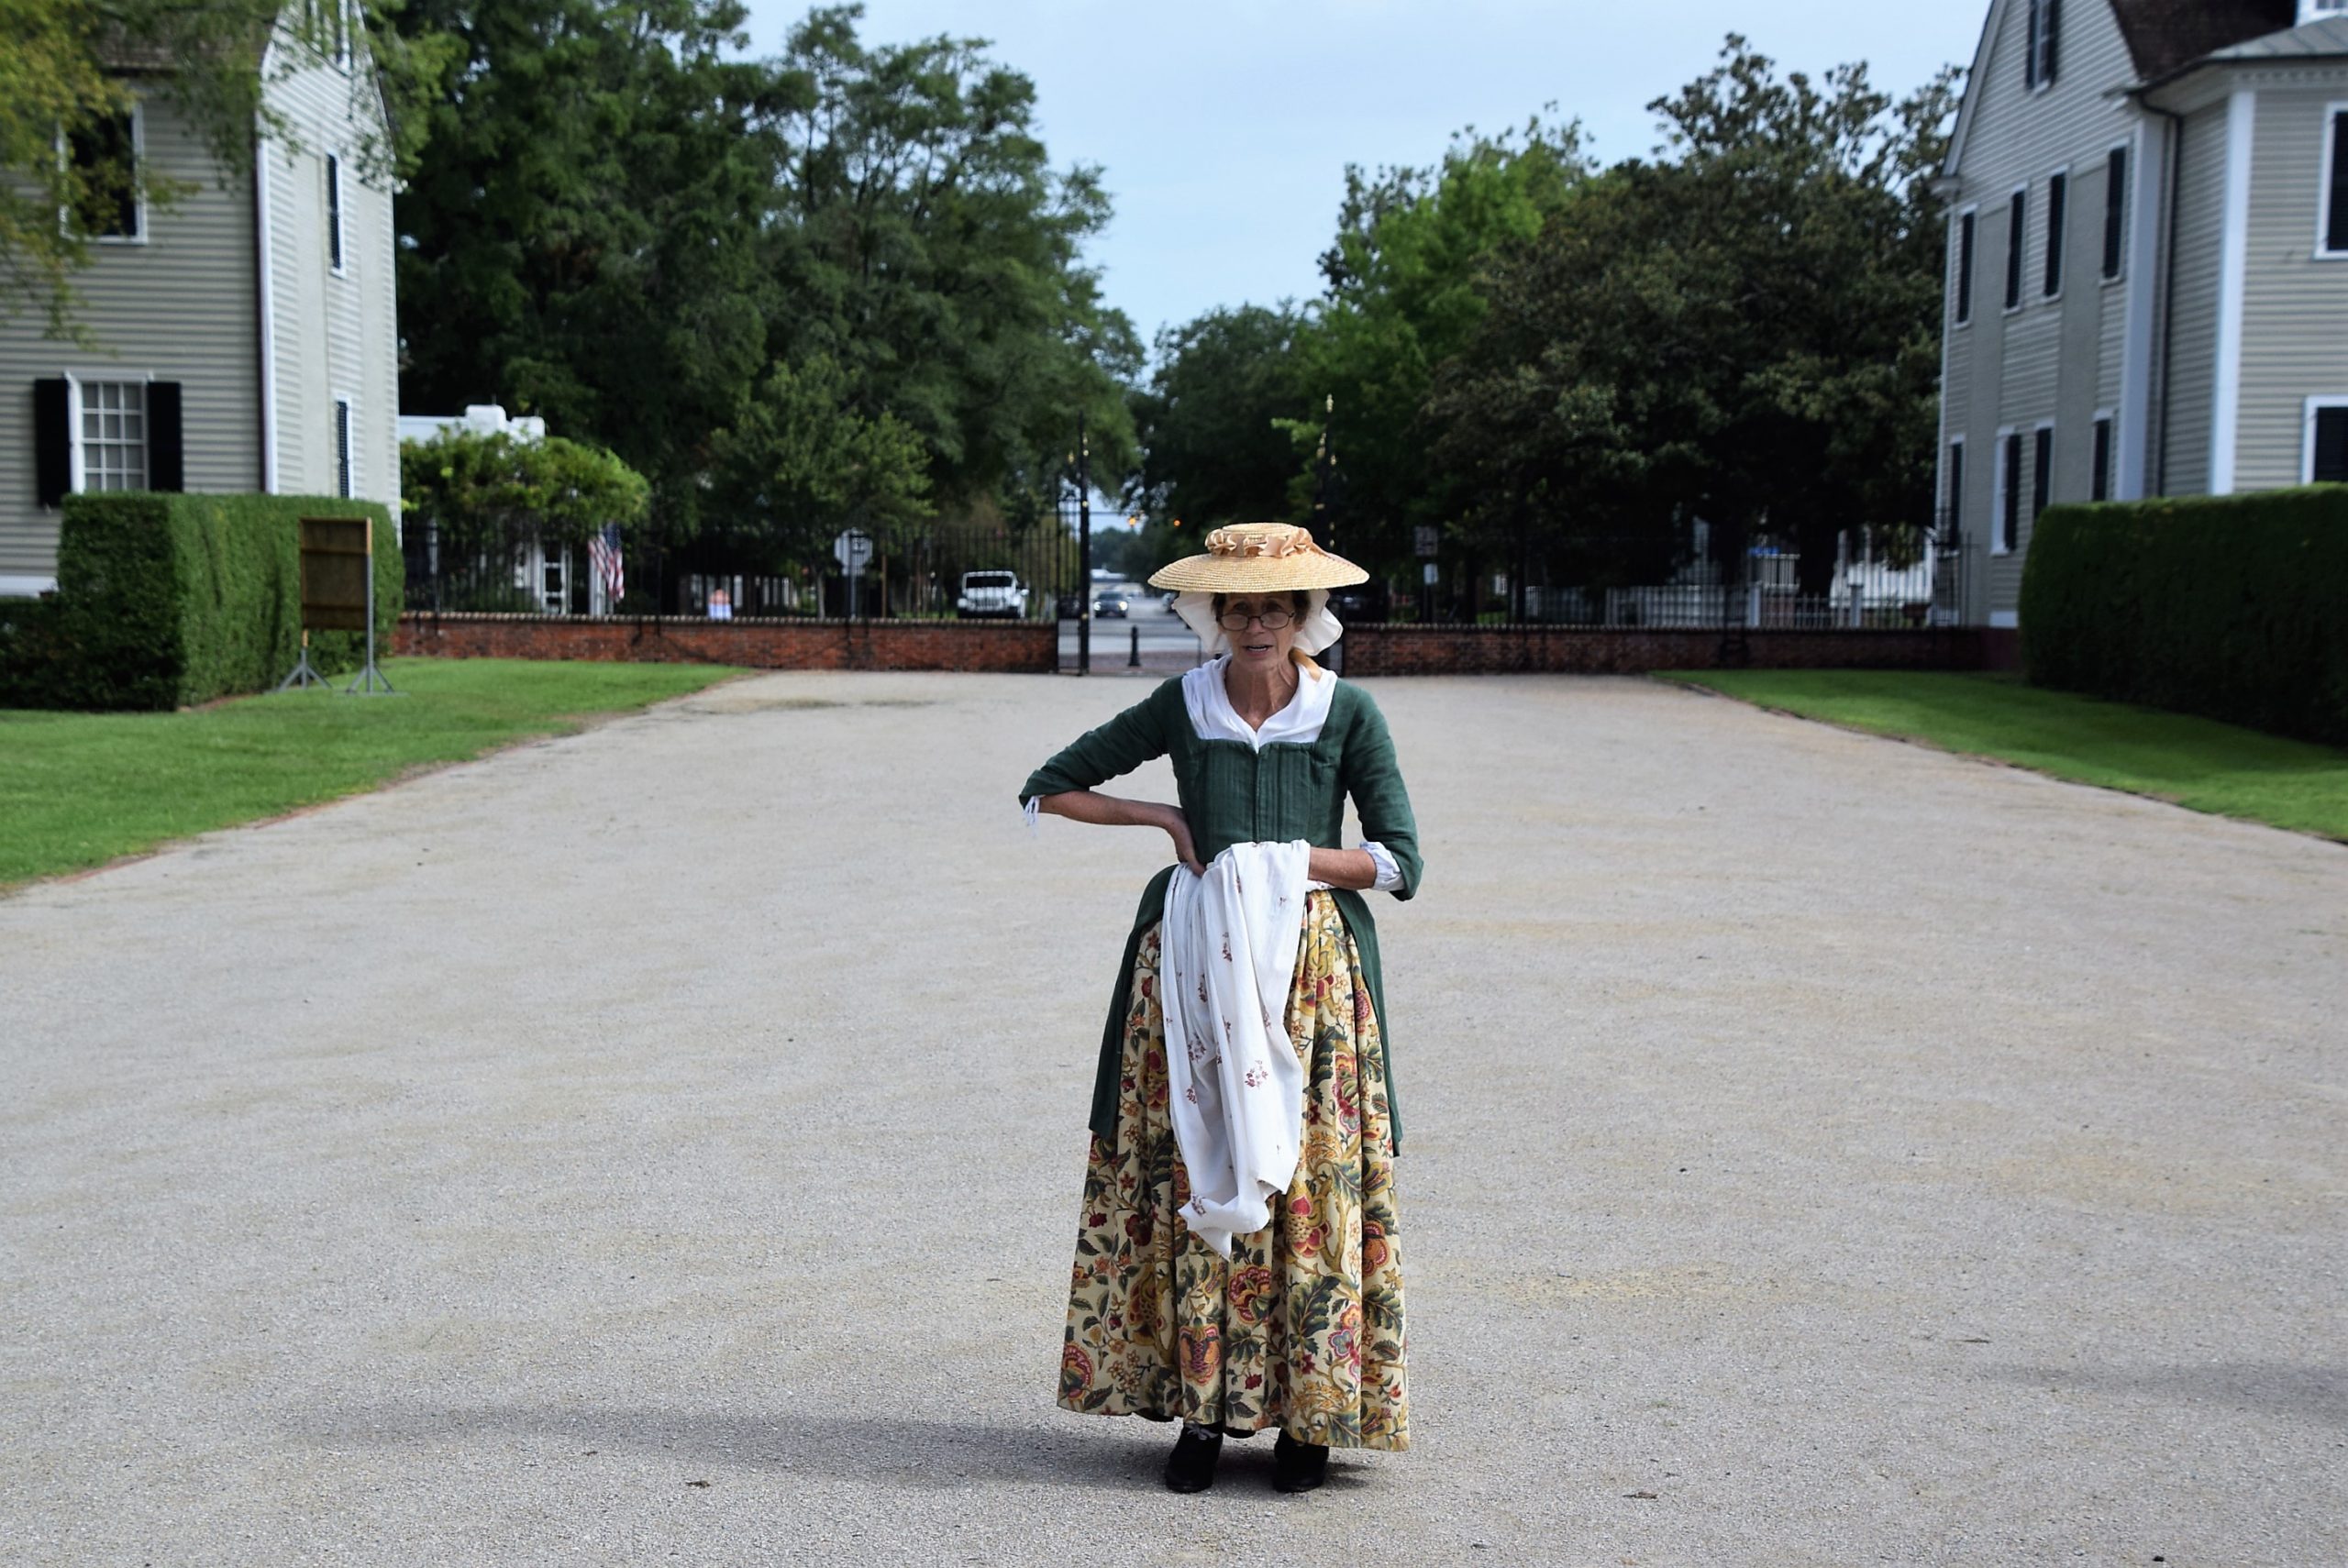 Tryon Palace Visits 1771 for 'Outlander' Event